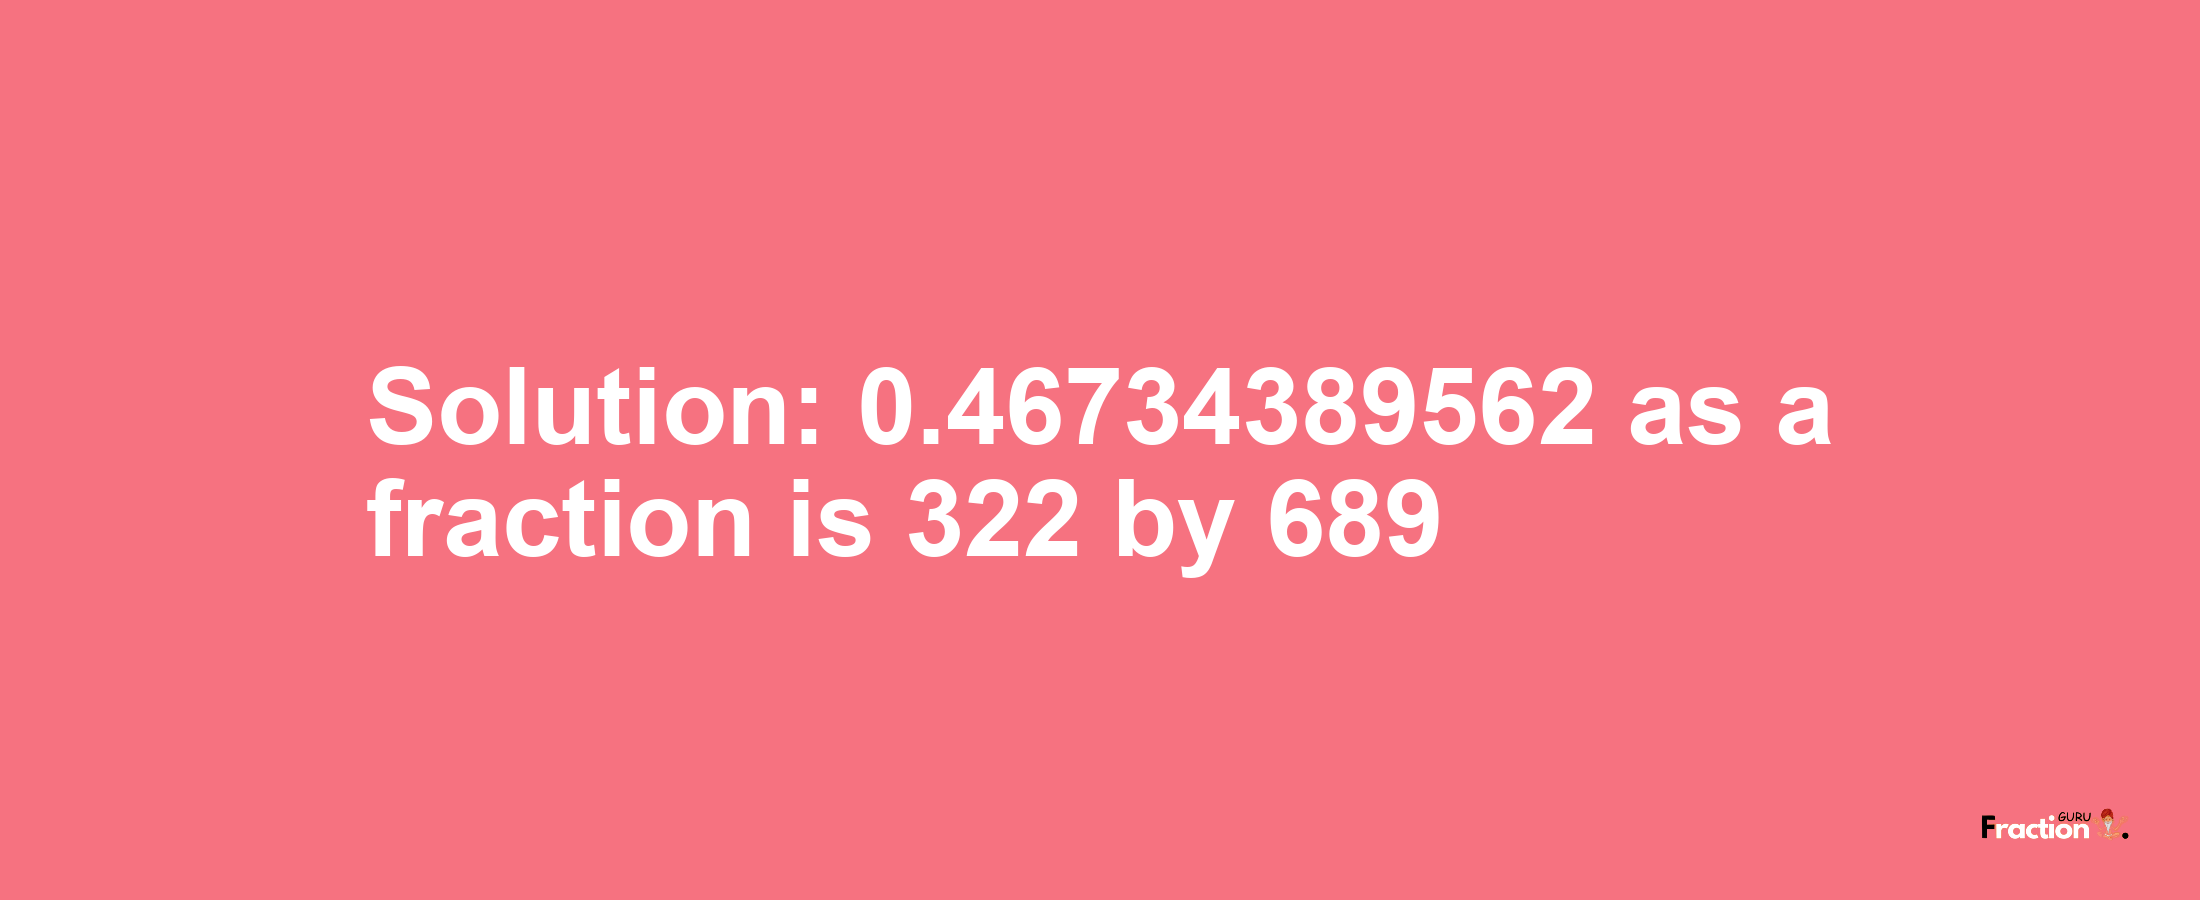 Solution:0.46734389562 as a fraction is 322/689